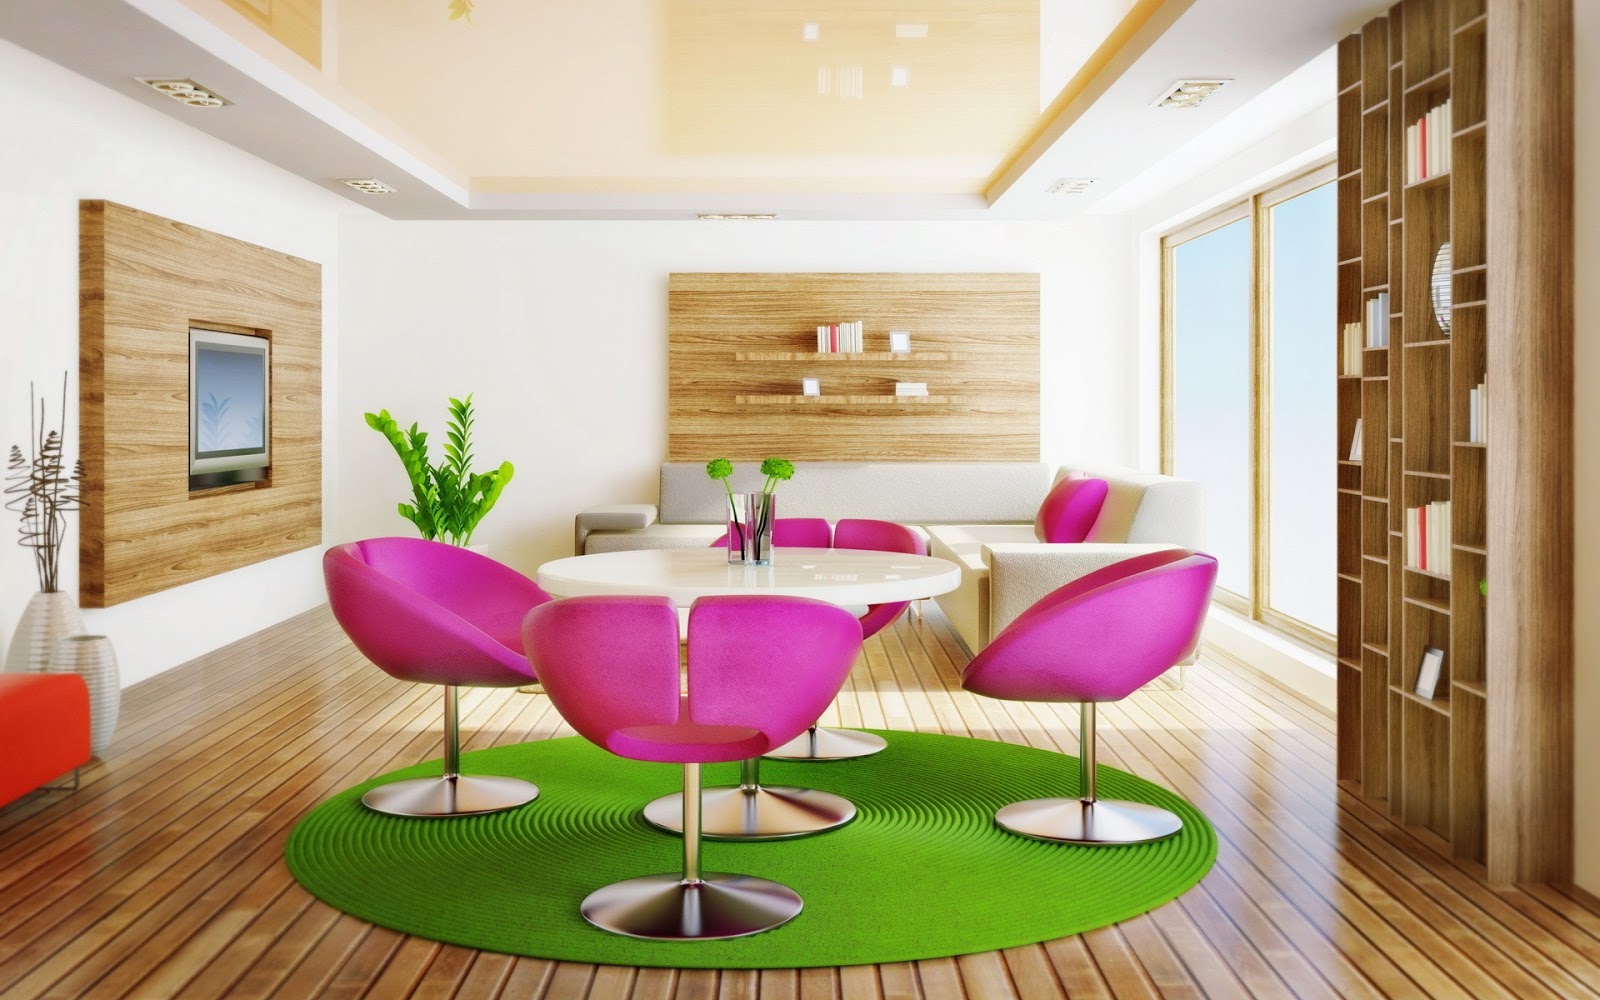 Pink Pedestal Modern Amusing Pink Pedestal Table Of Modern Dining Room With Interior Design Styles Furnished With White Round Table On Green Rug In Circle Shaped Interior Design Composing The Classic Or Modern Interior Design Styles